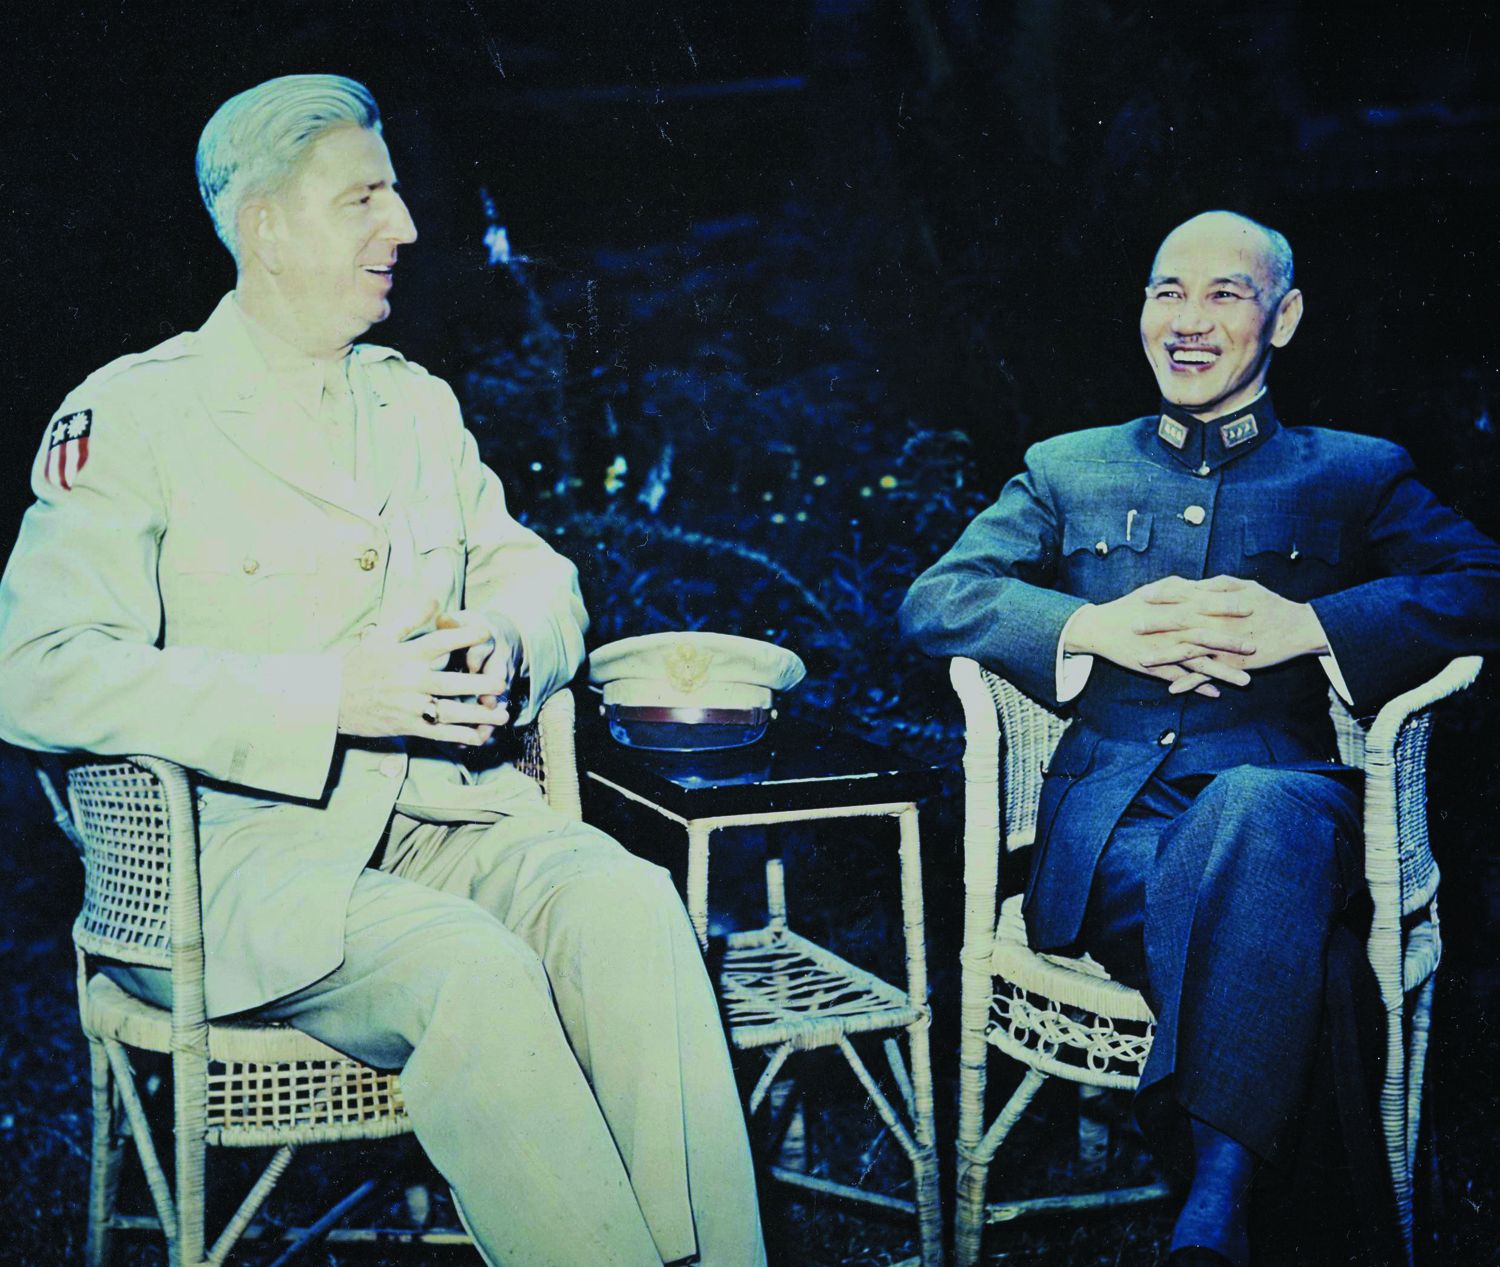 Lieutenant General Albert C. Wedemeyer, overall Allied commander in China and chief of staff to Kuomintang leader Chiang Kai-shek, chats with the Generalissimo. Under Wedemeyer’s command, General Claire Chennault and the Fourteenth Air Force assumed a renewed offensive posture.